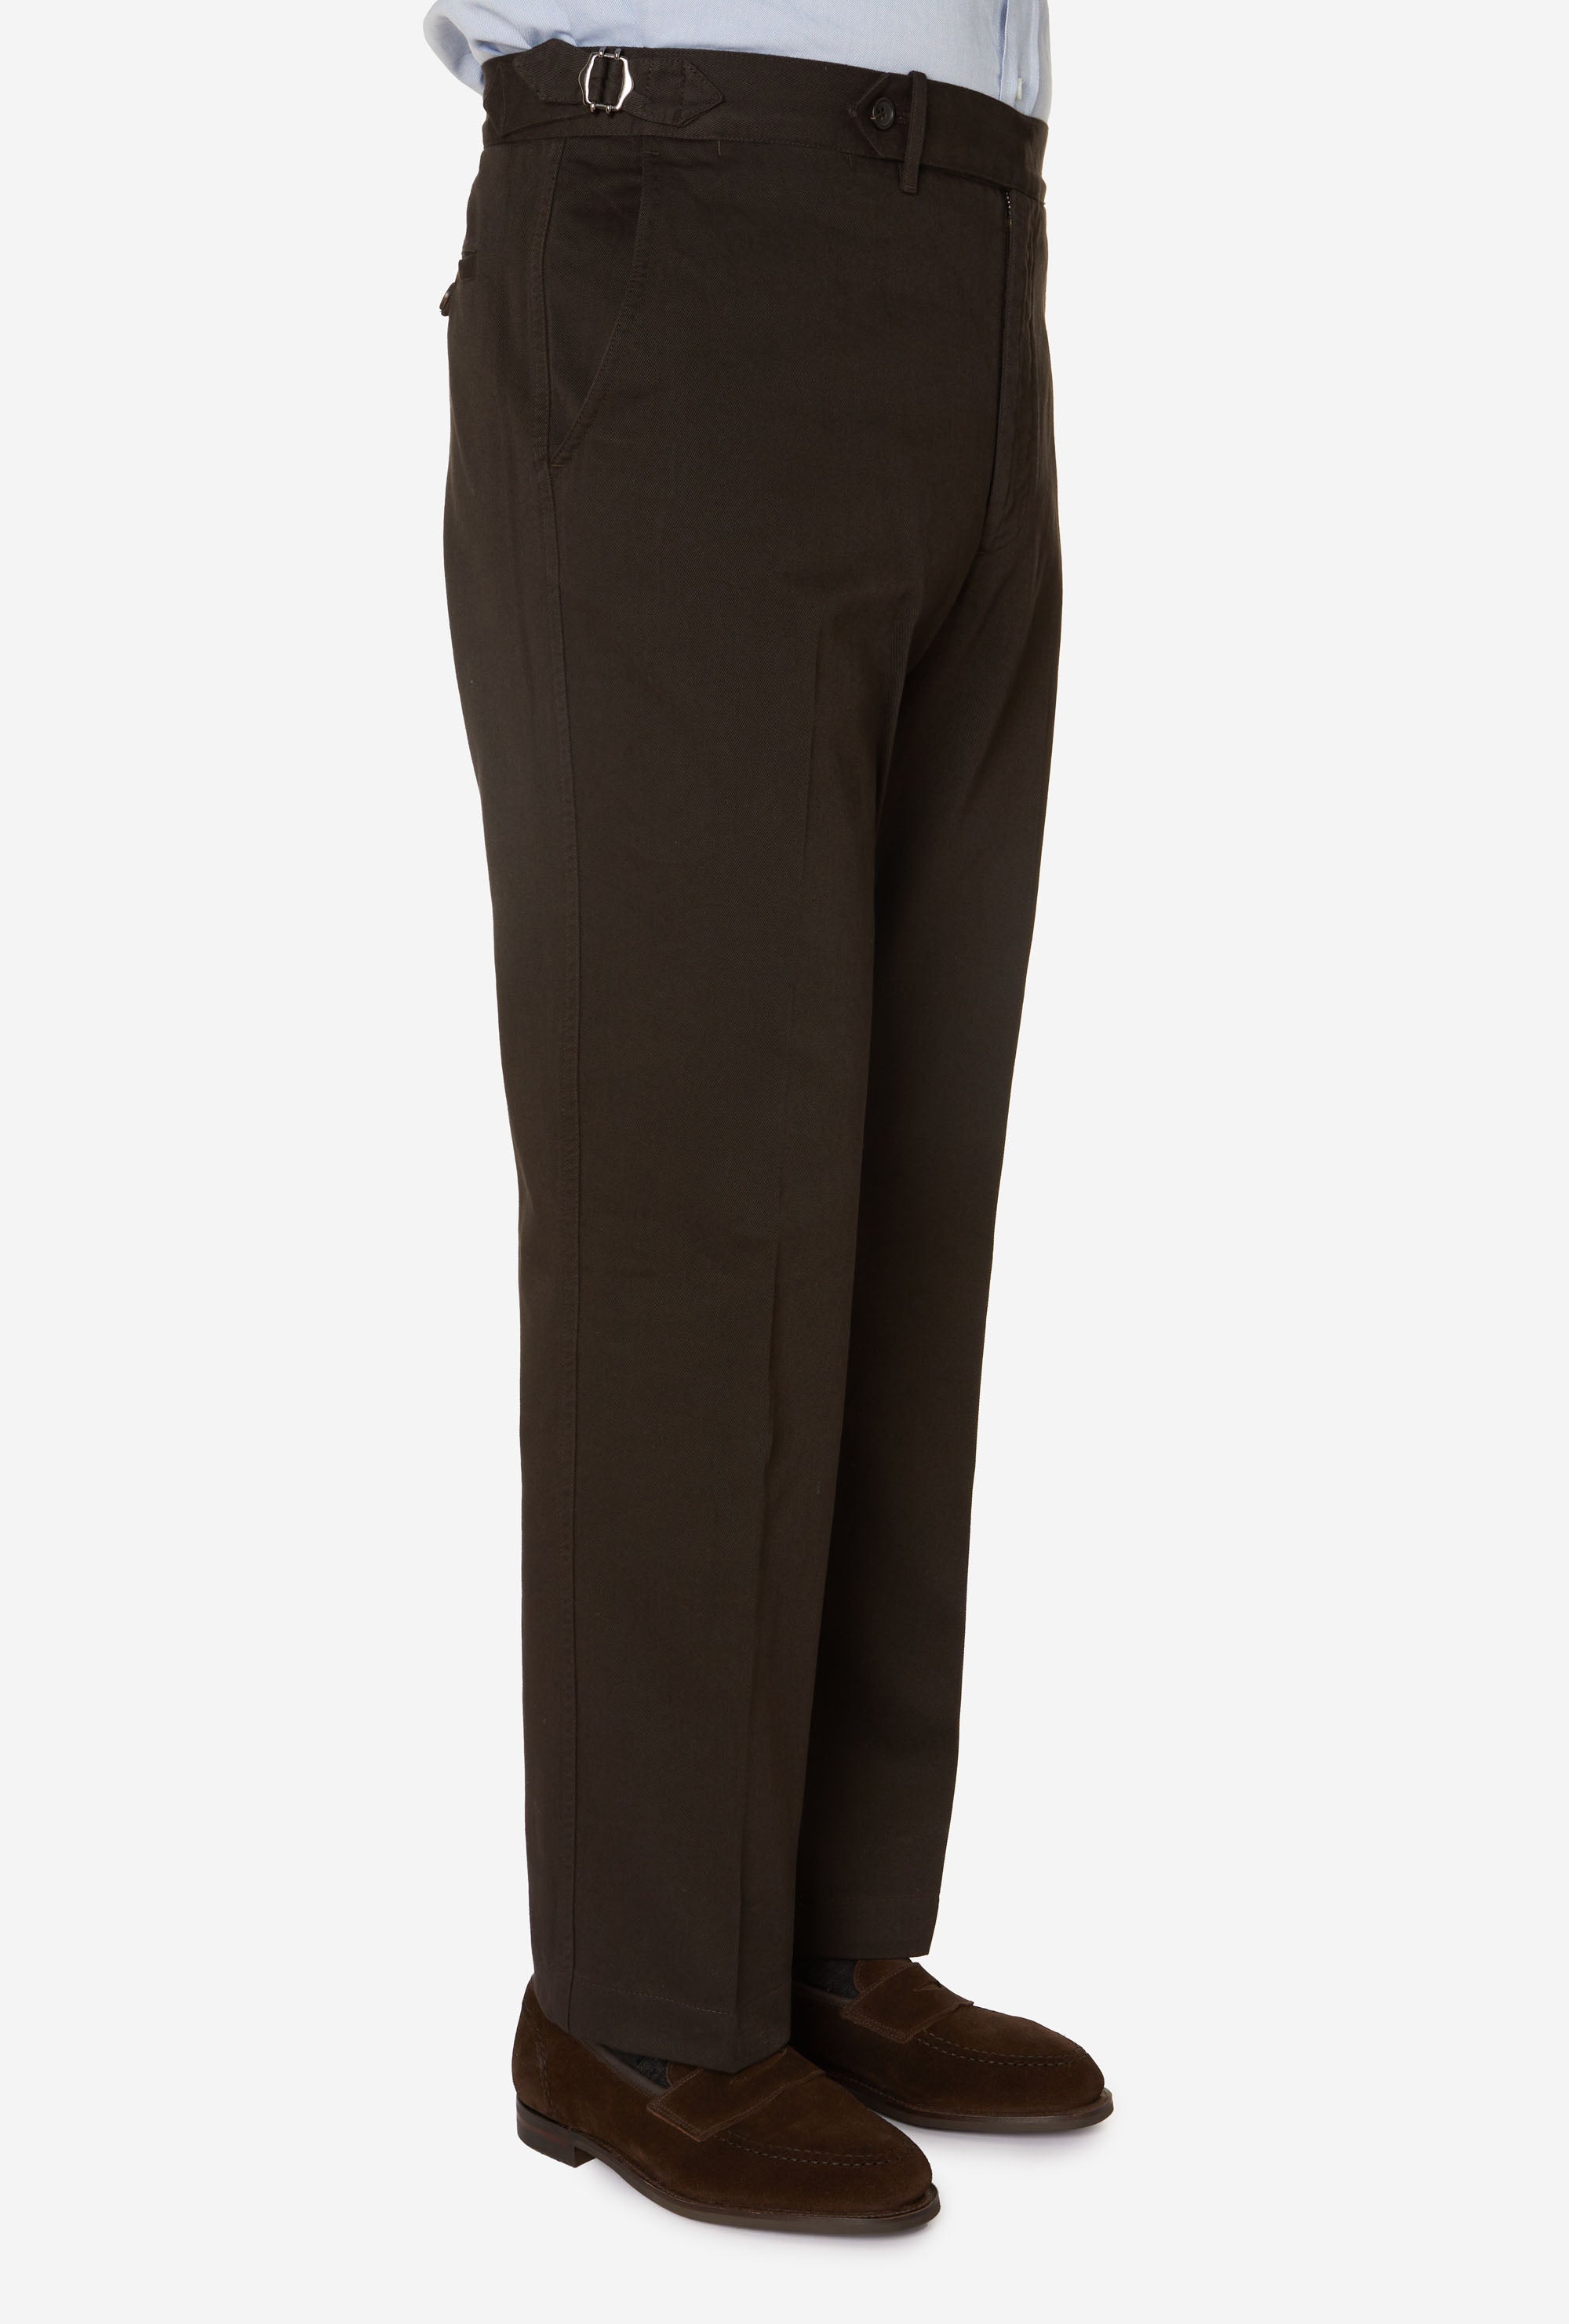 Garment Dyed Flat Front Cotton Trouser Brown